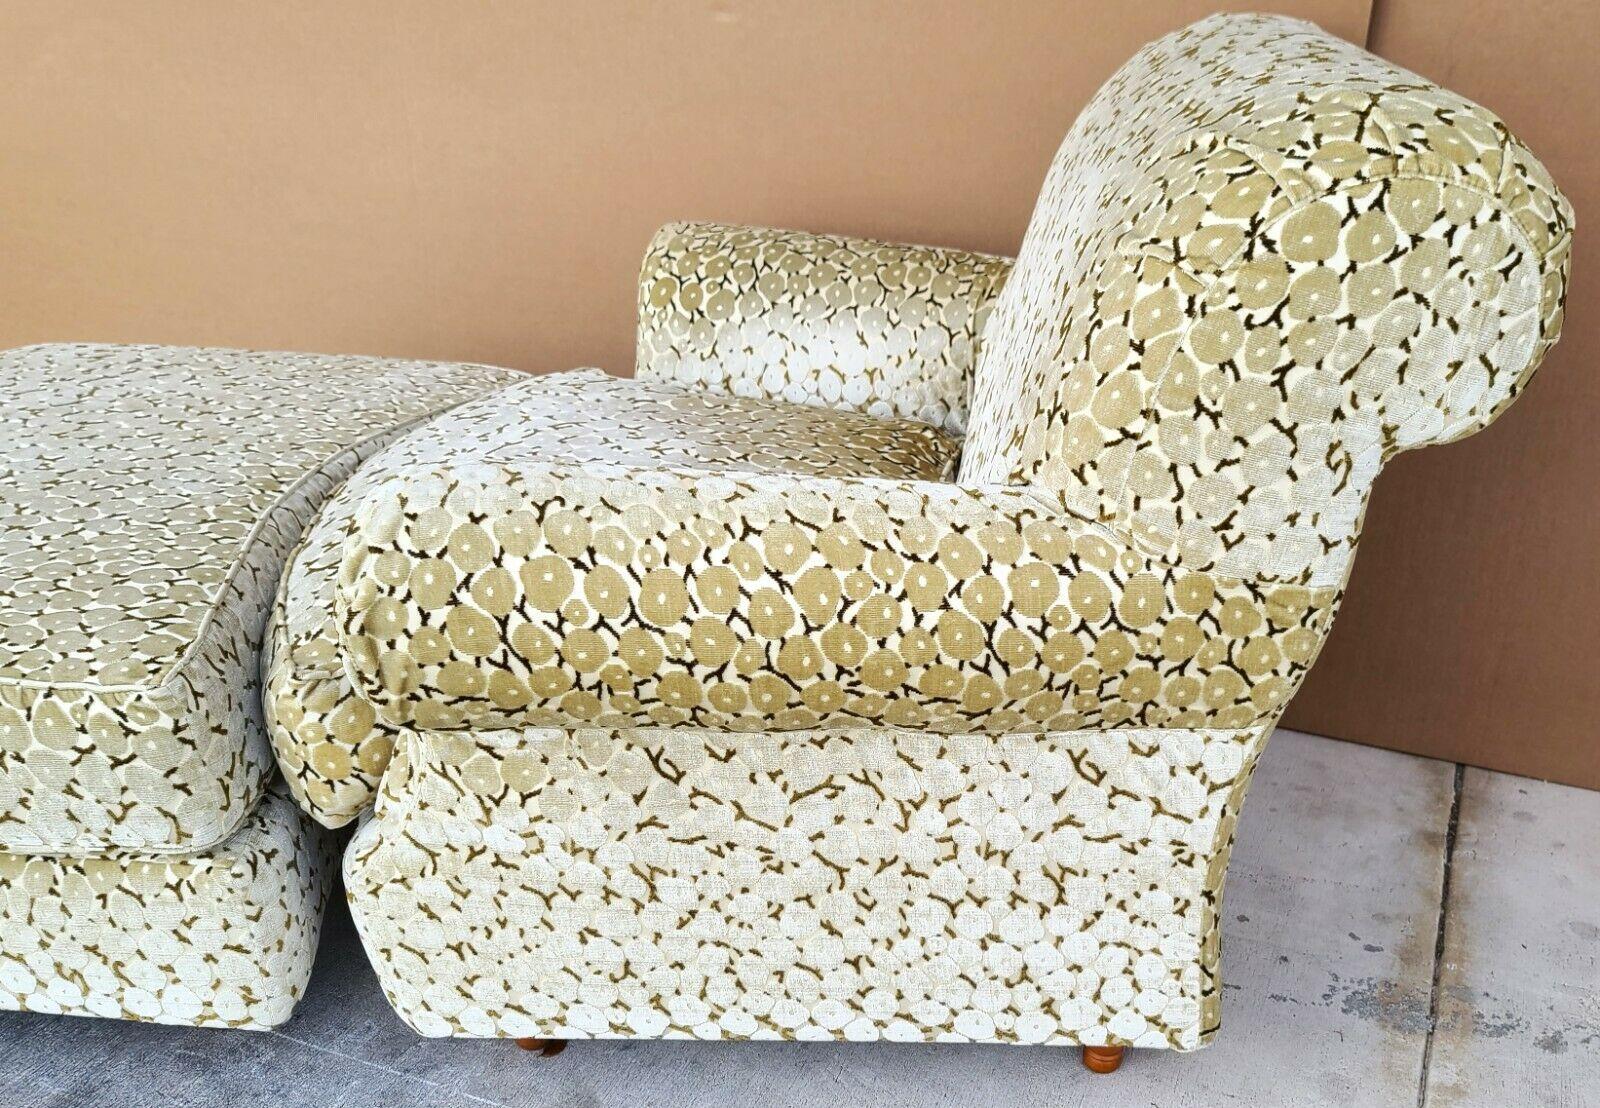 Offering One Of Our Recent Palm Beach Estate Fine Furniture Acquisitions Of A
Oversized Velvet Slip Covered Lounge Chair & Ottoman by ALIVAR of Italy
Slip covers are secured tightly with Velcro underneath chair and ottoman.
Cushions are foam core